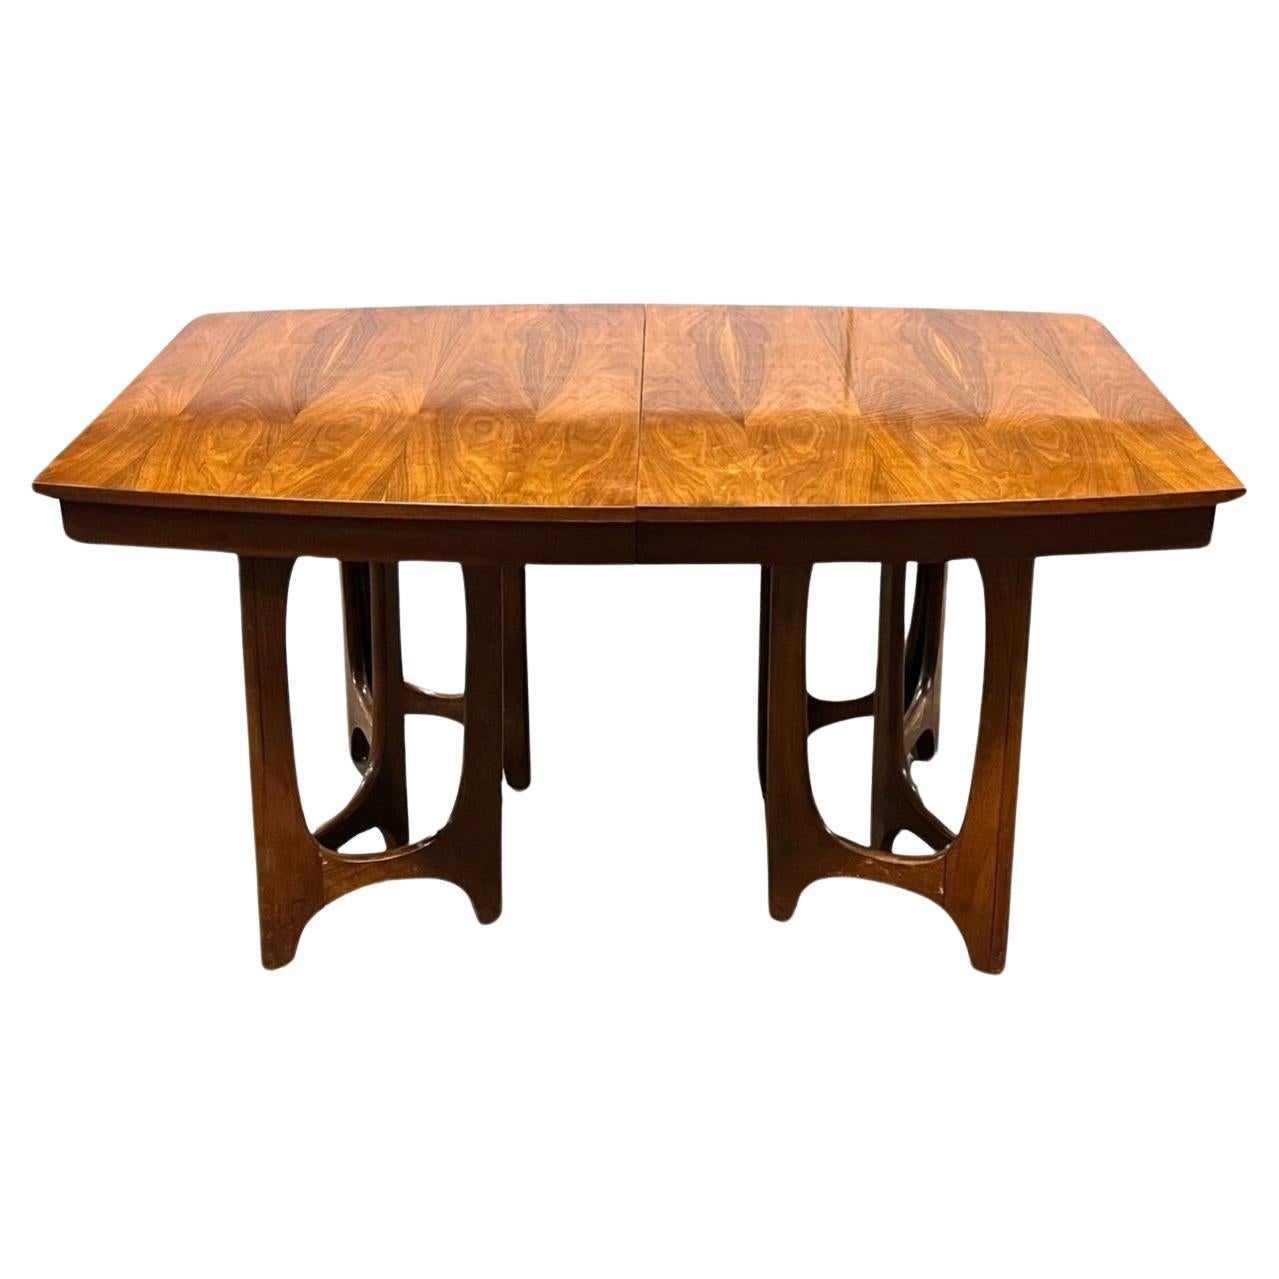 Young Mfg Vintage Mid Century Modern Sculpted Pedestal Dining Table c. 1960s For Sale